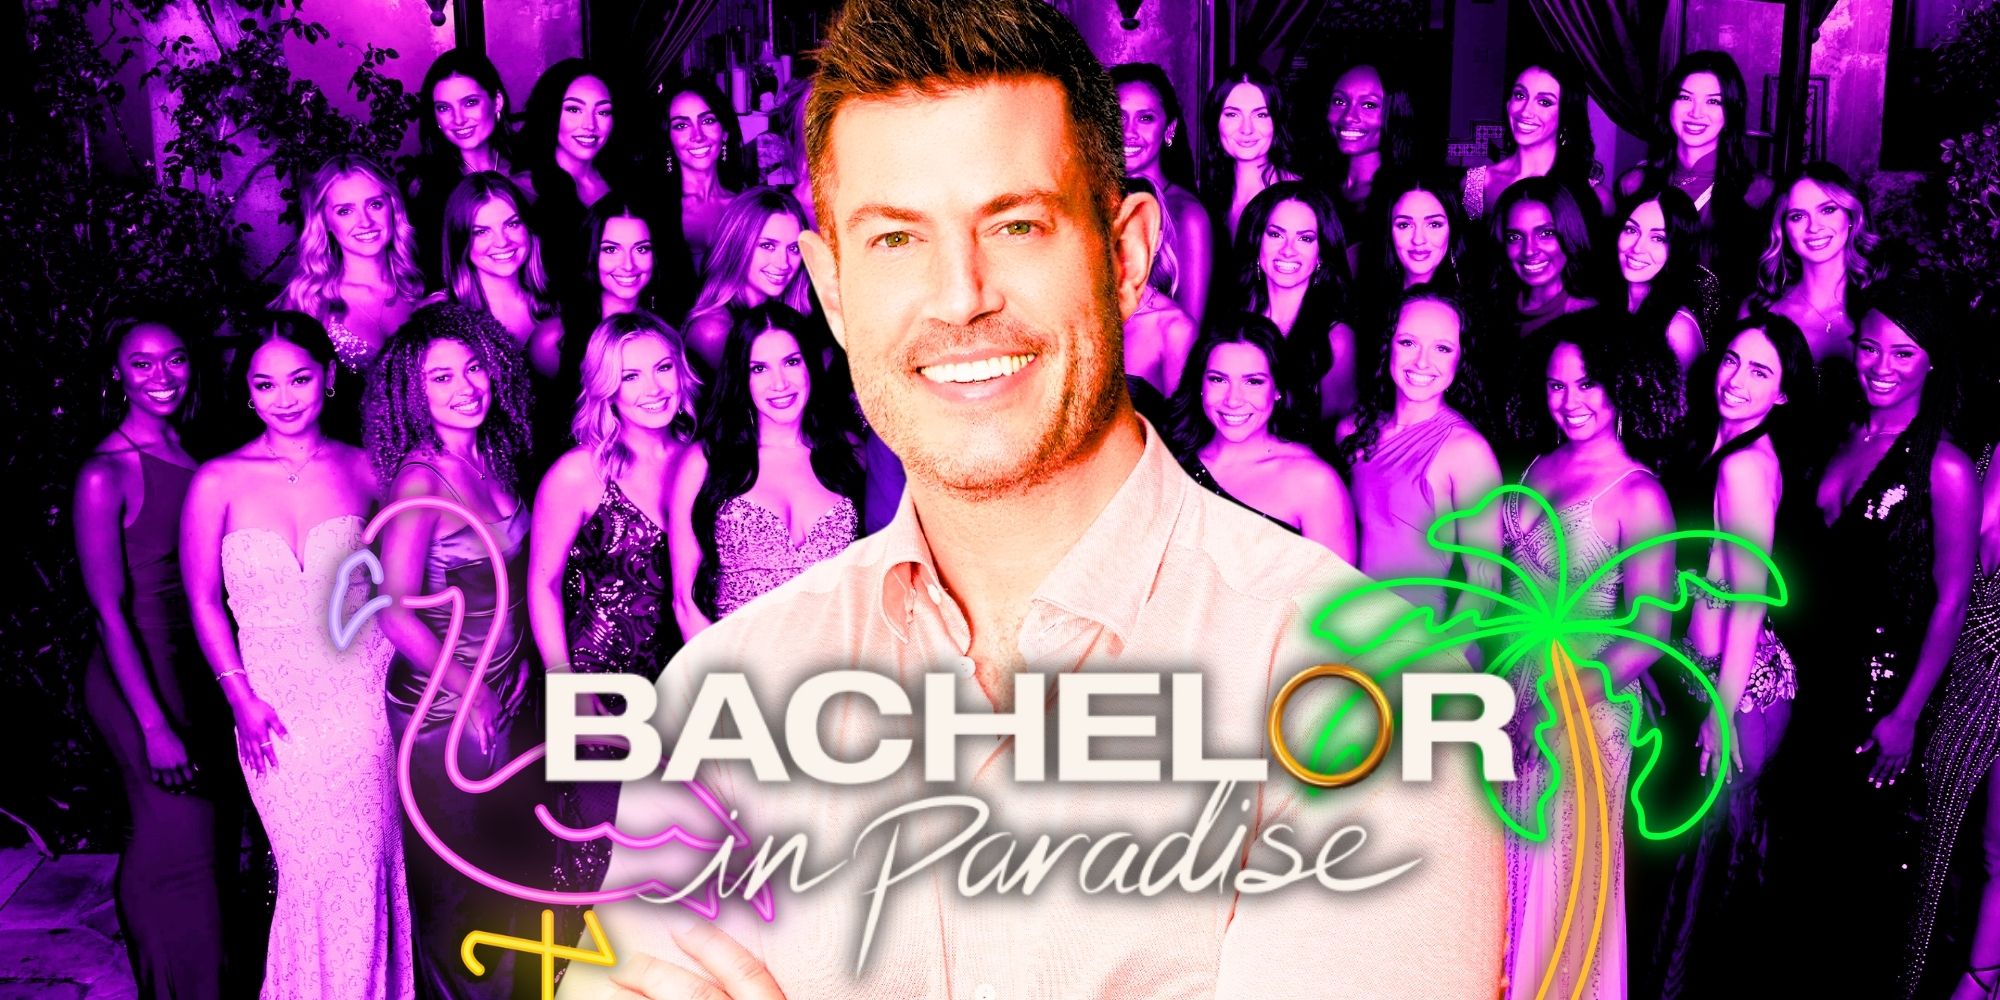 Bachelor in paradise host Jesse palmer with The Bachelor 28 cast